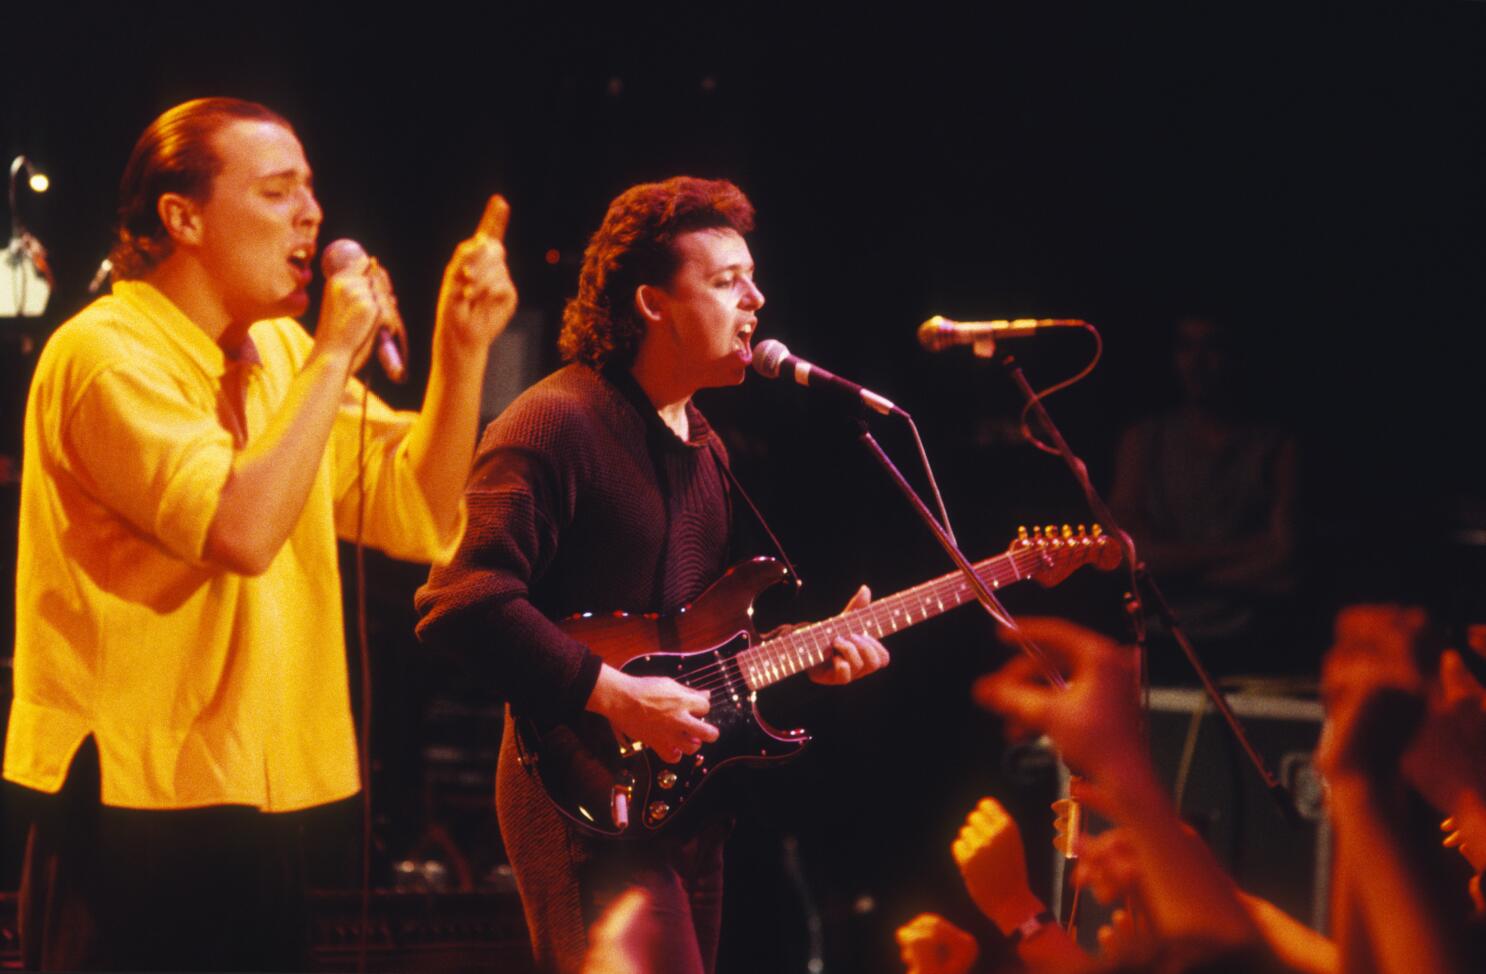 Tears for Fears – Roland & Curt Interviewed